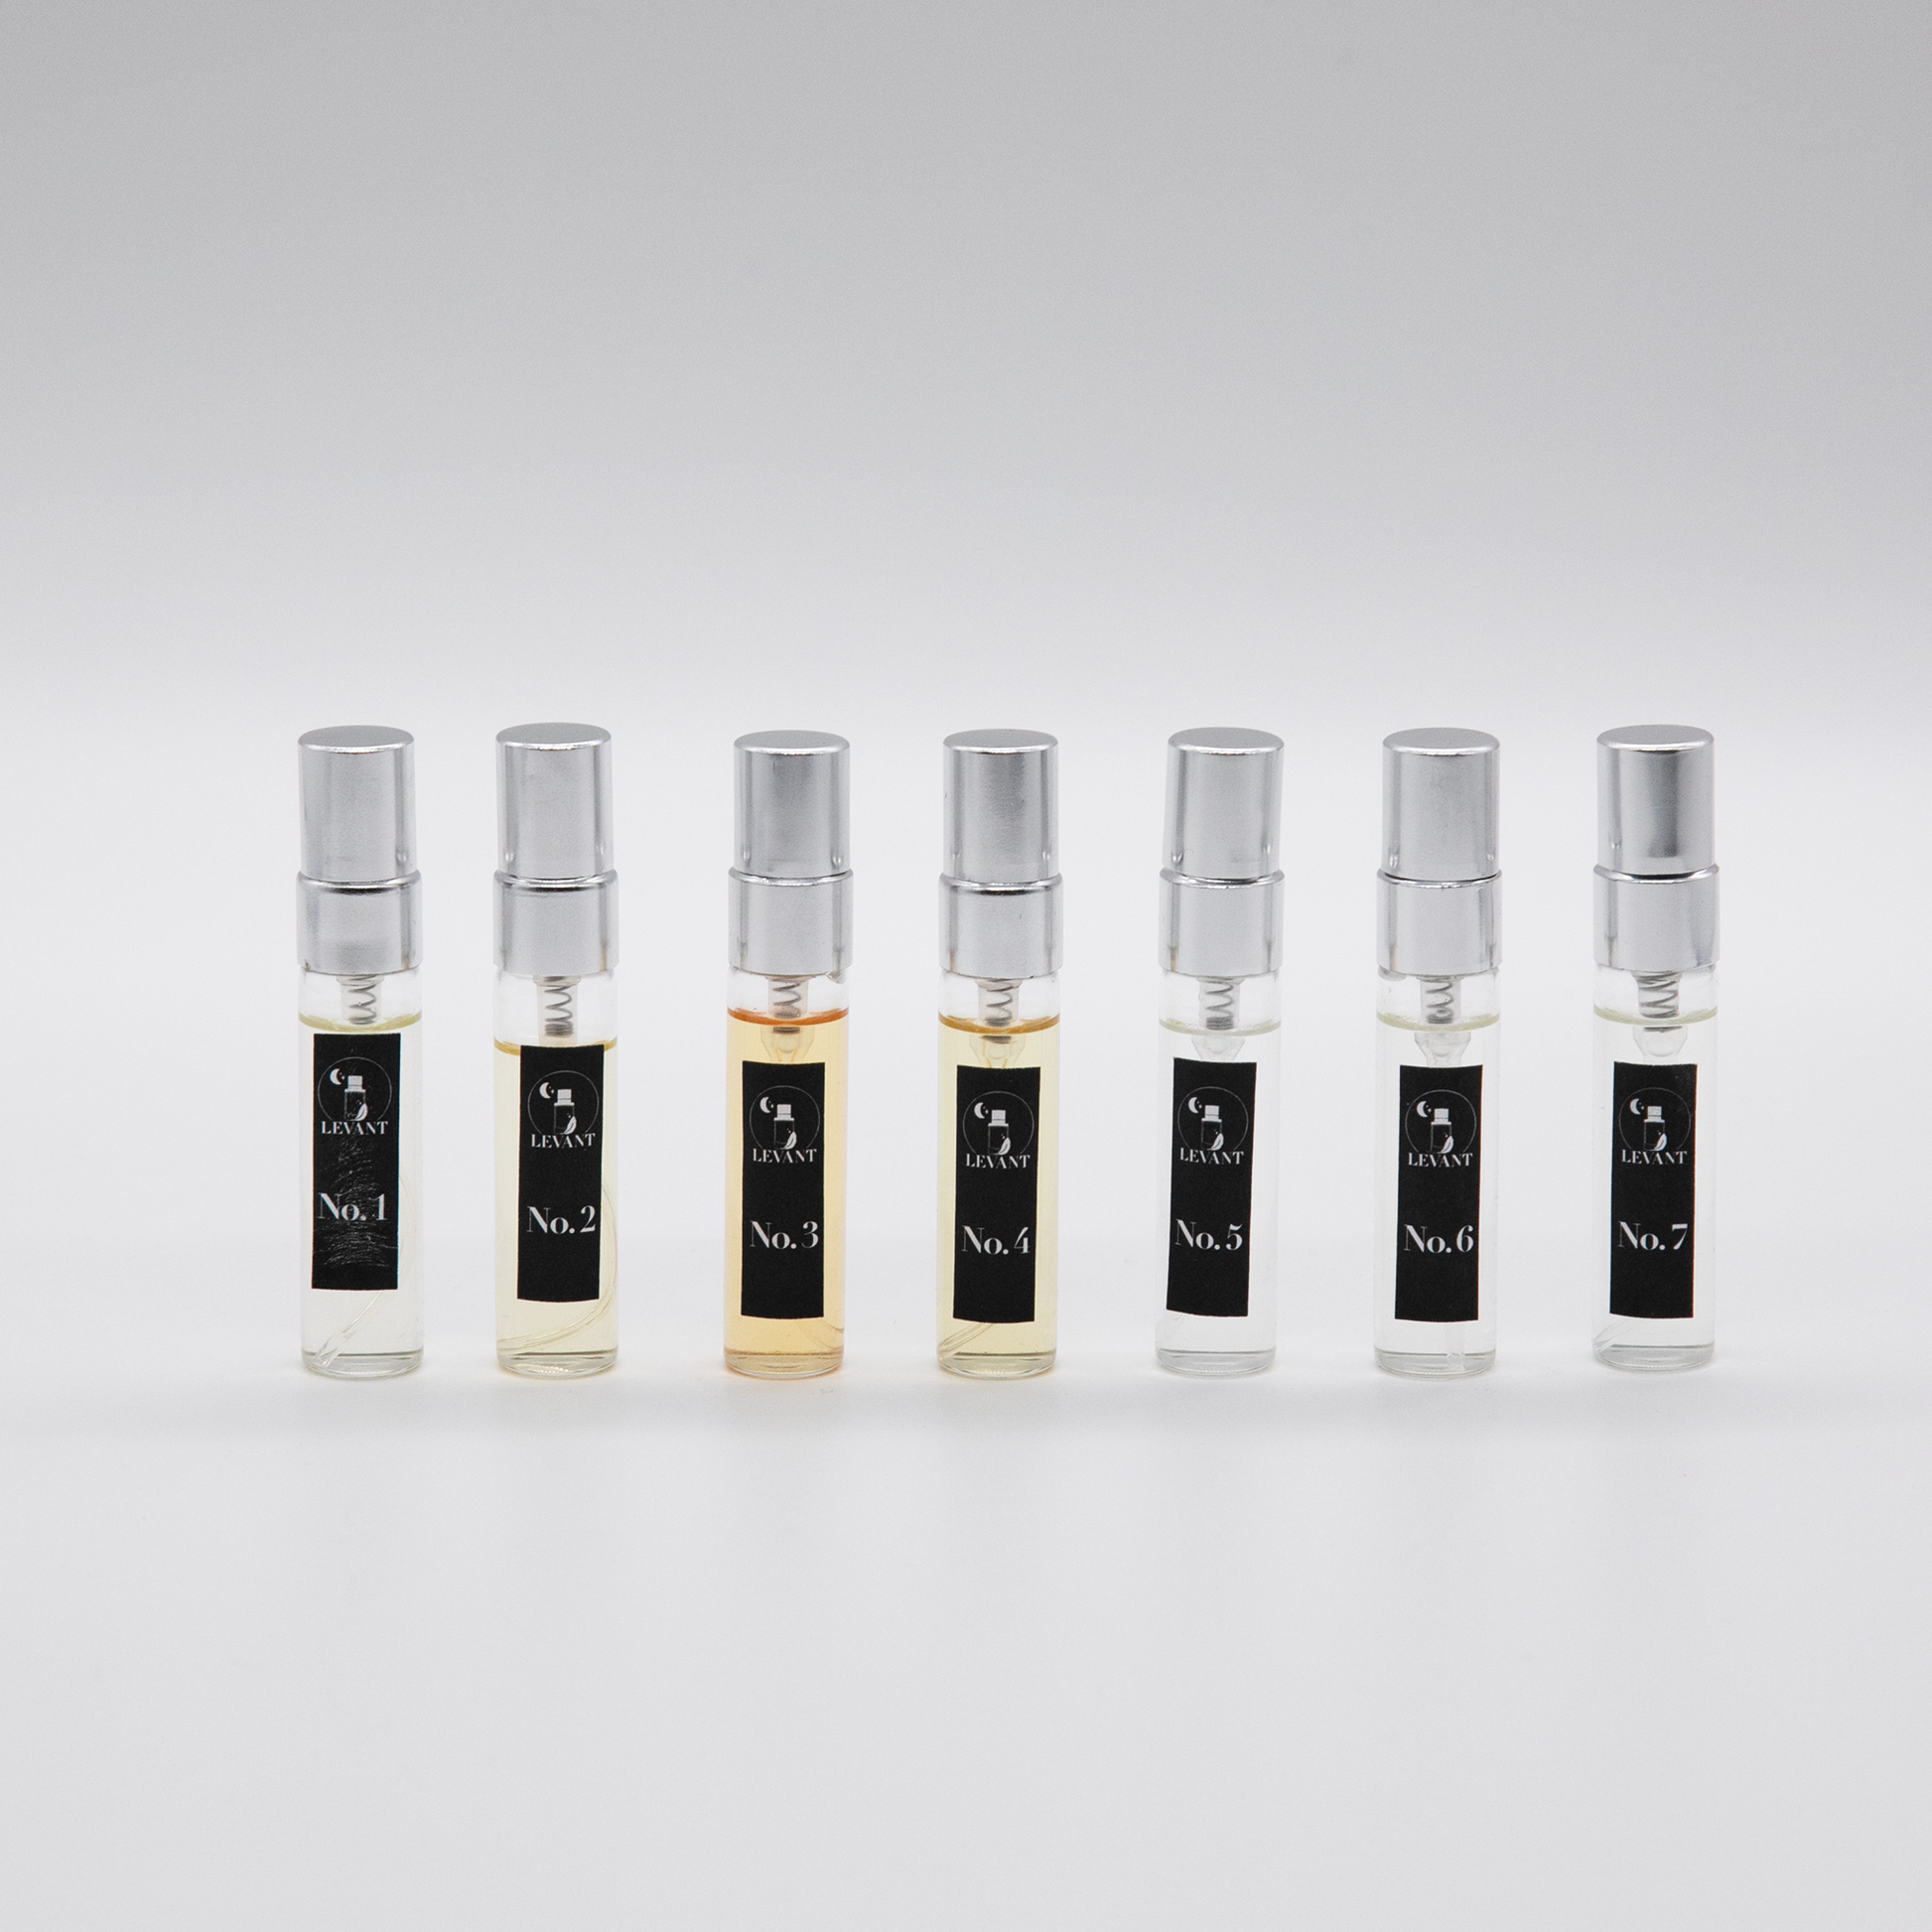 The levant perfume collection 5ml bottles